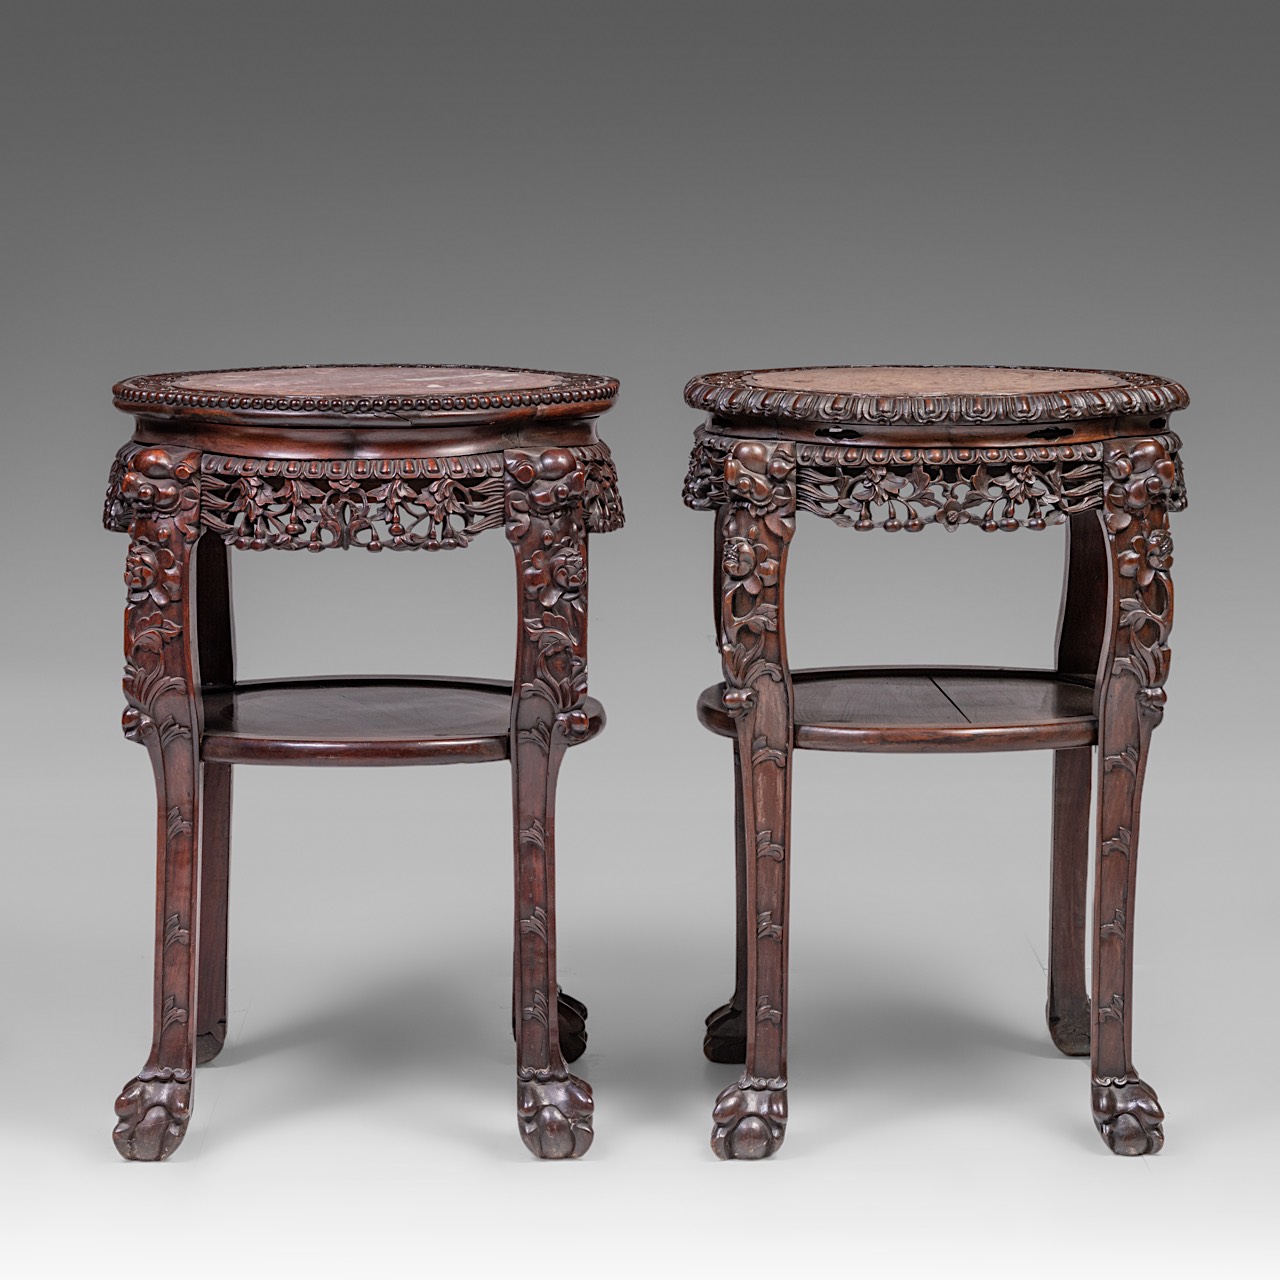 A small collection of four South Chinese carved hardwood bases, all with a marble top, late Qing, ta - Image 6 of 17